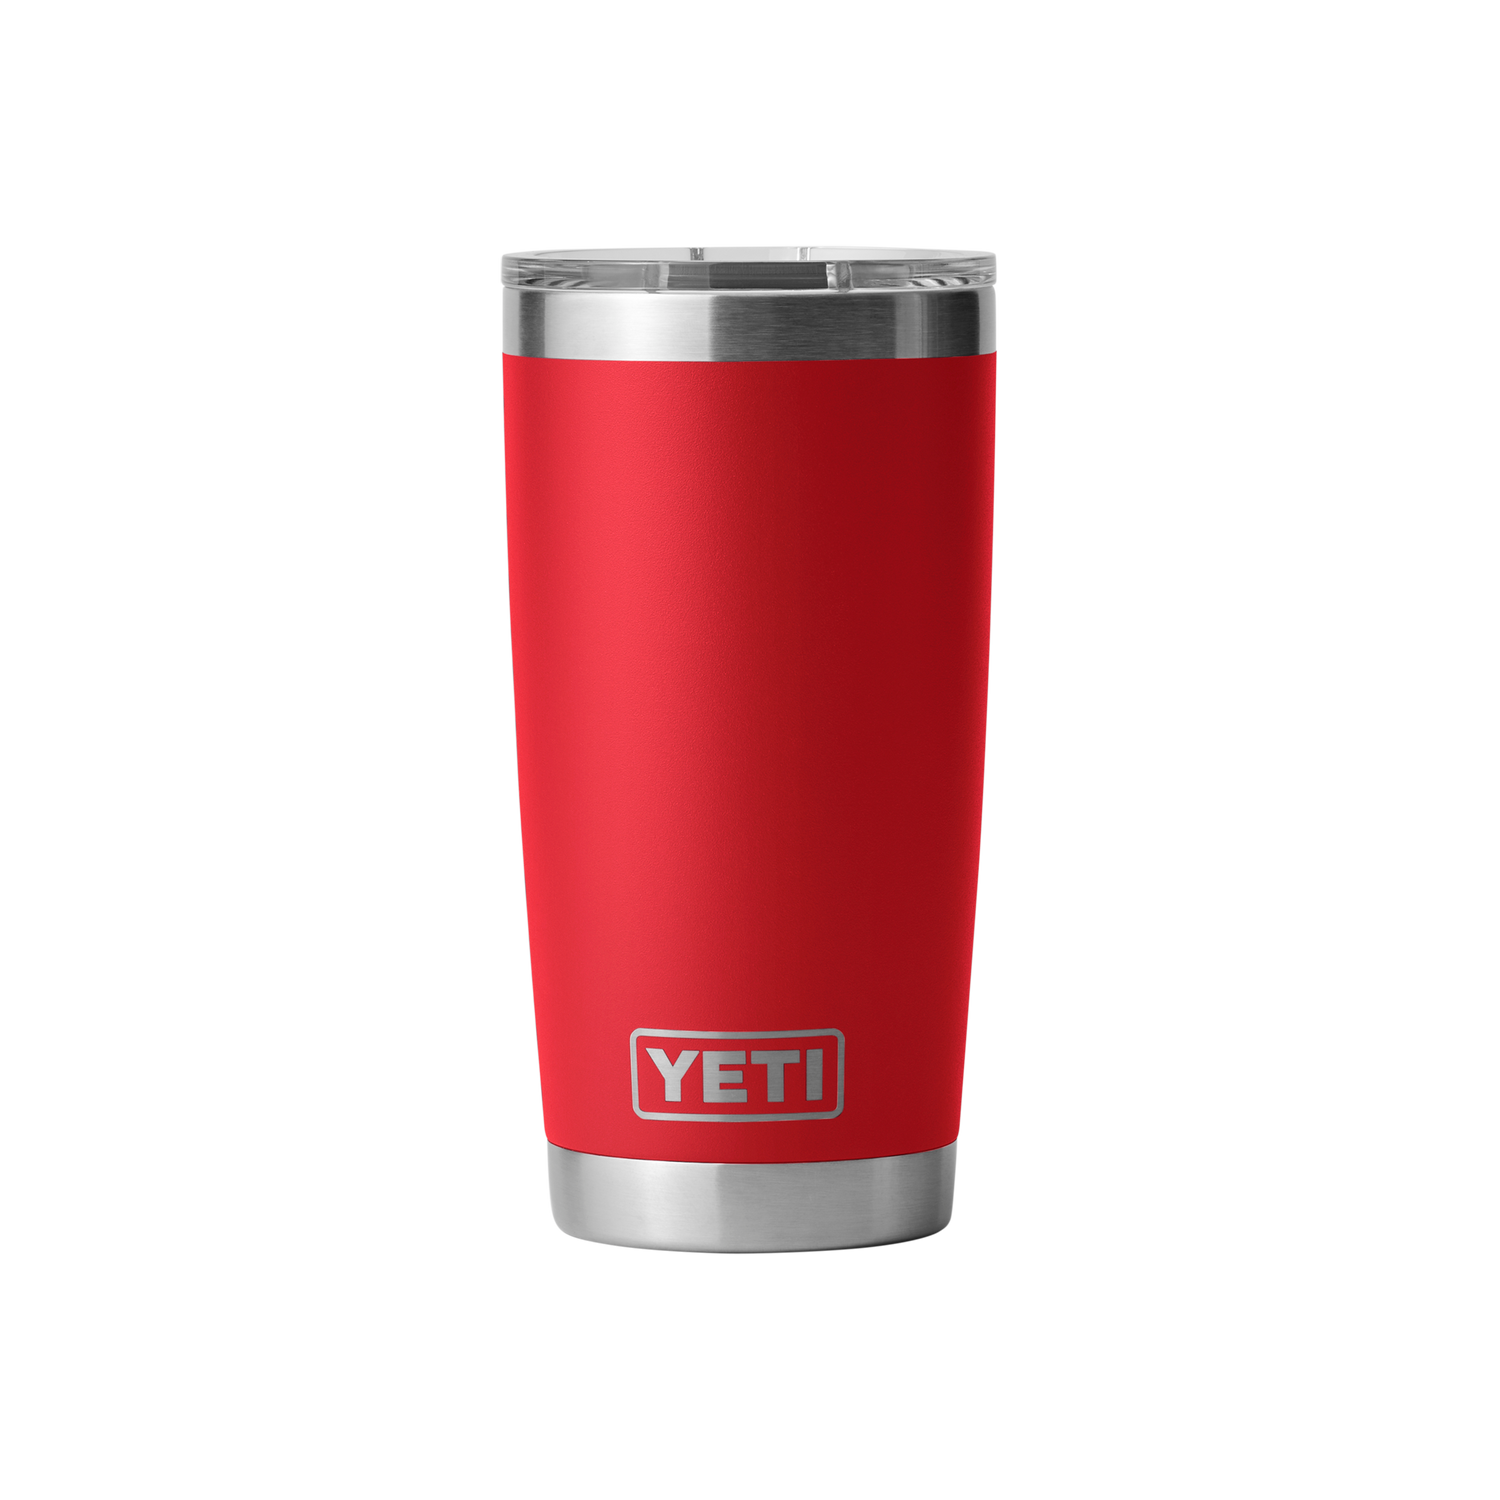 Harvest Red Collection – YETI EUROPE